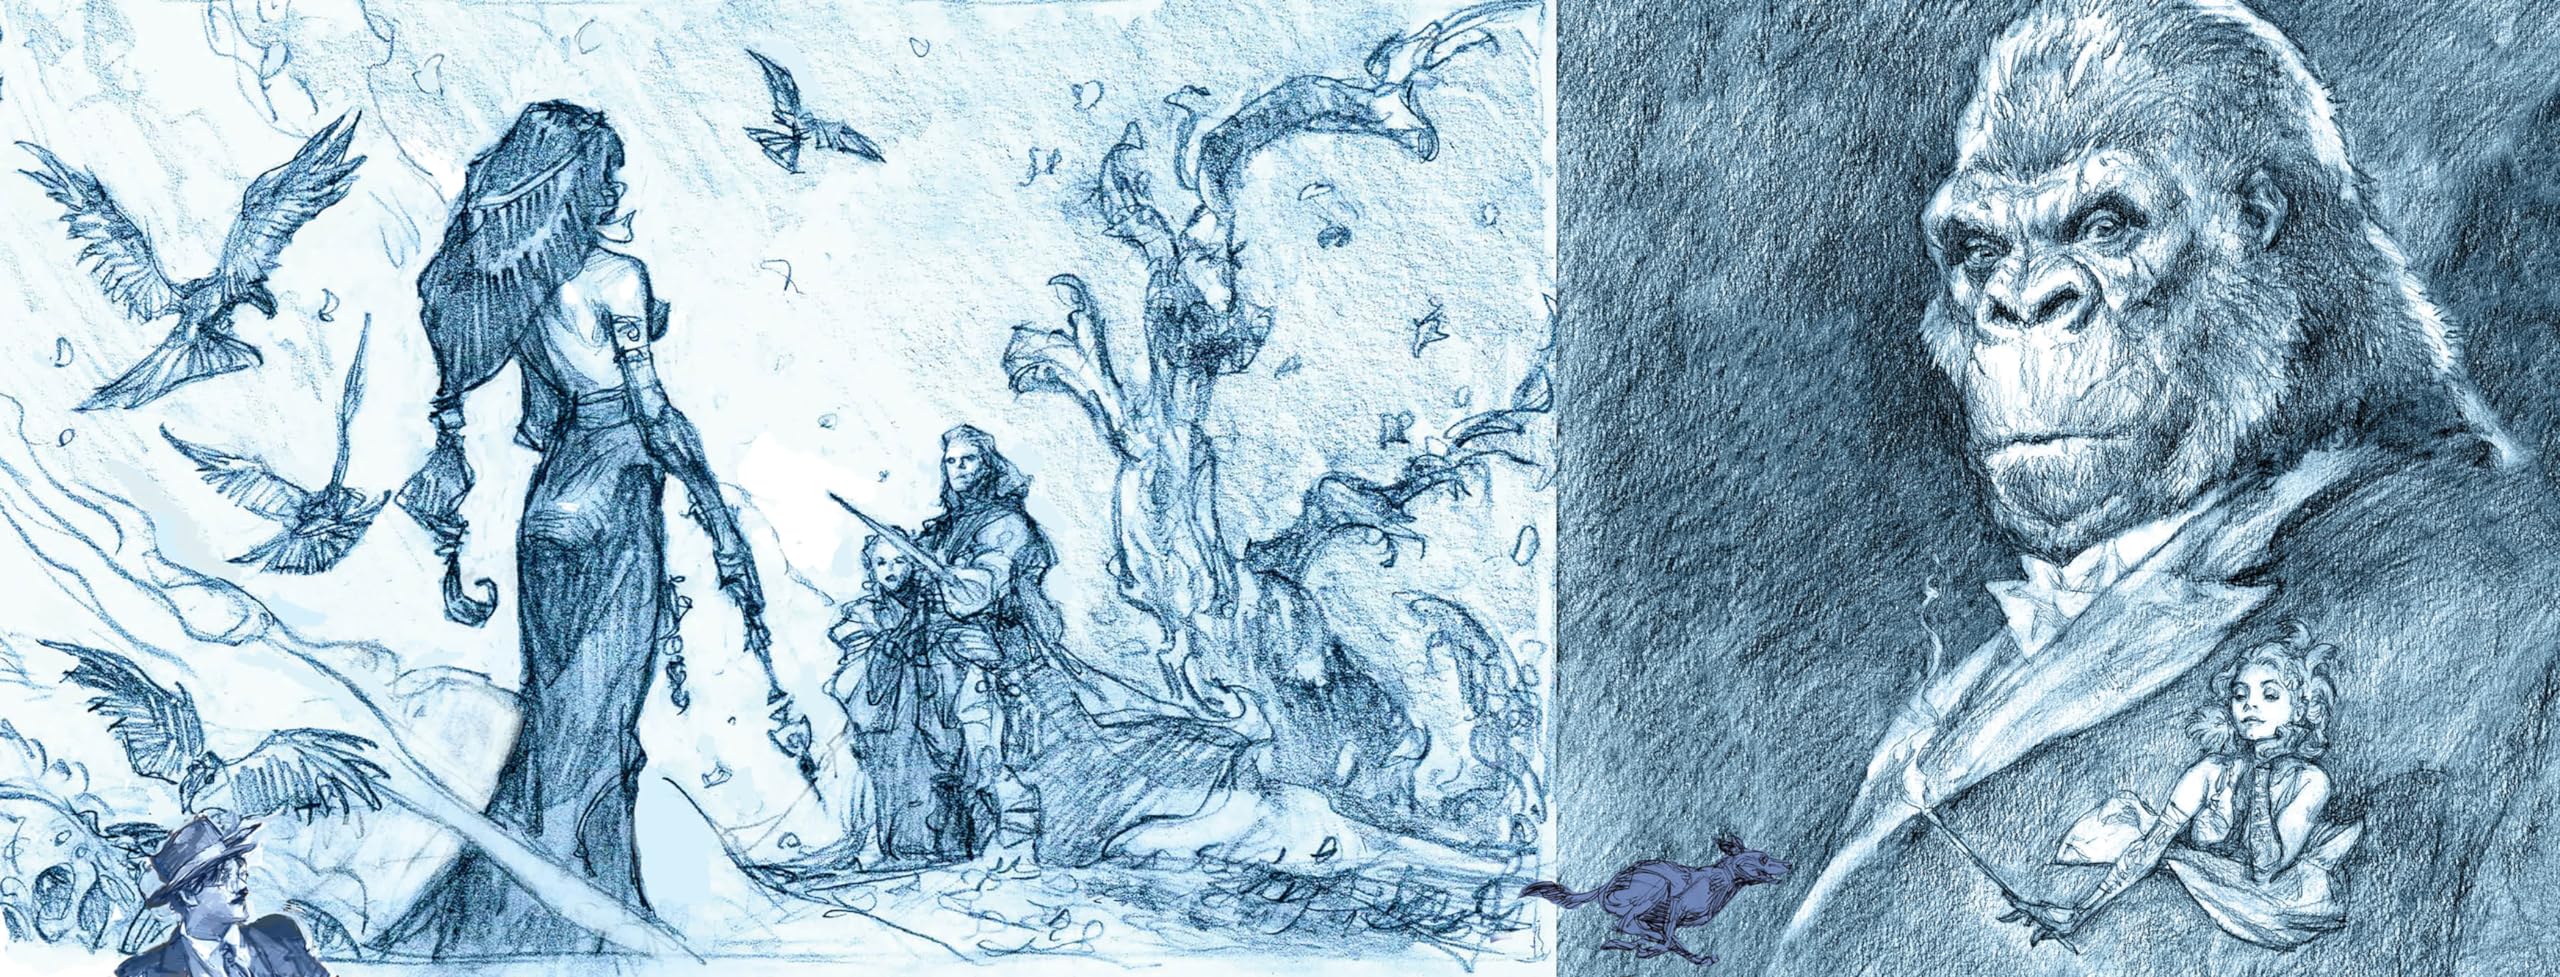 Iain McCaig's Once Upon a Time in the Sketchbook